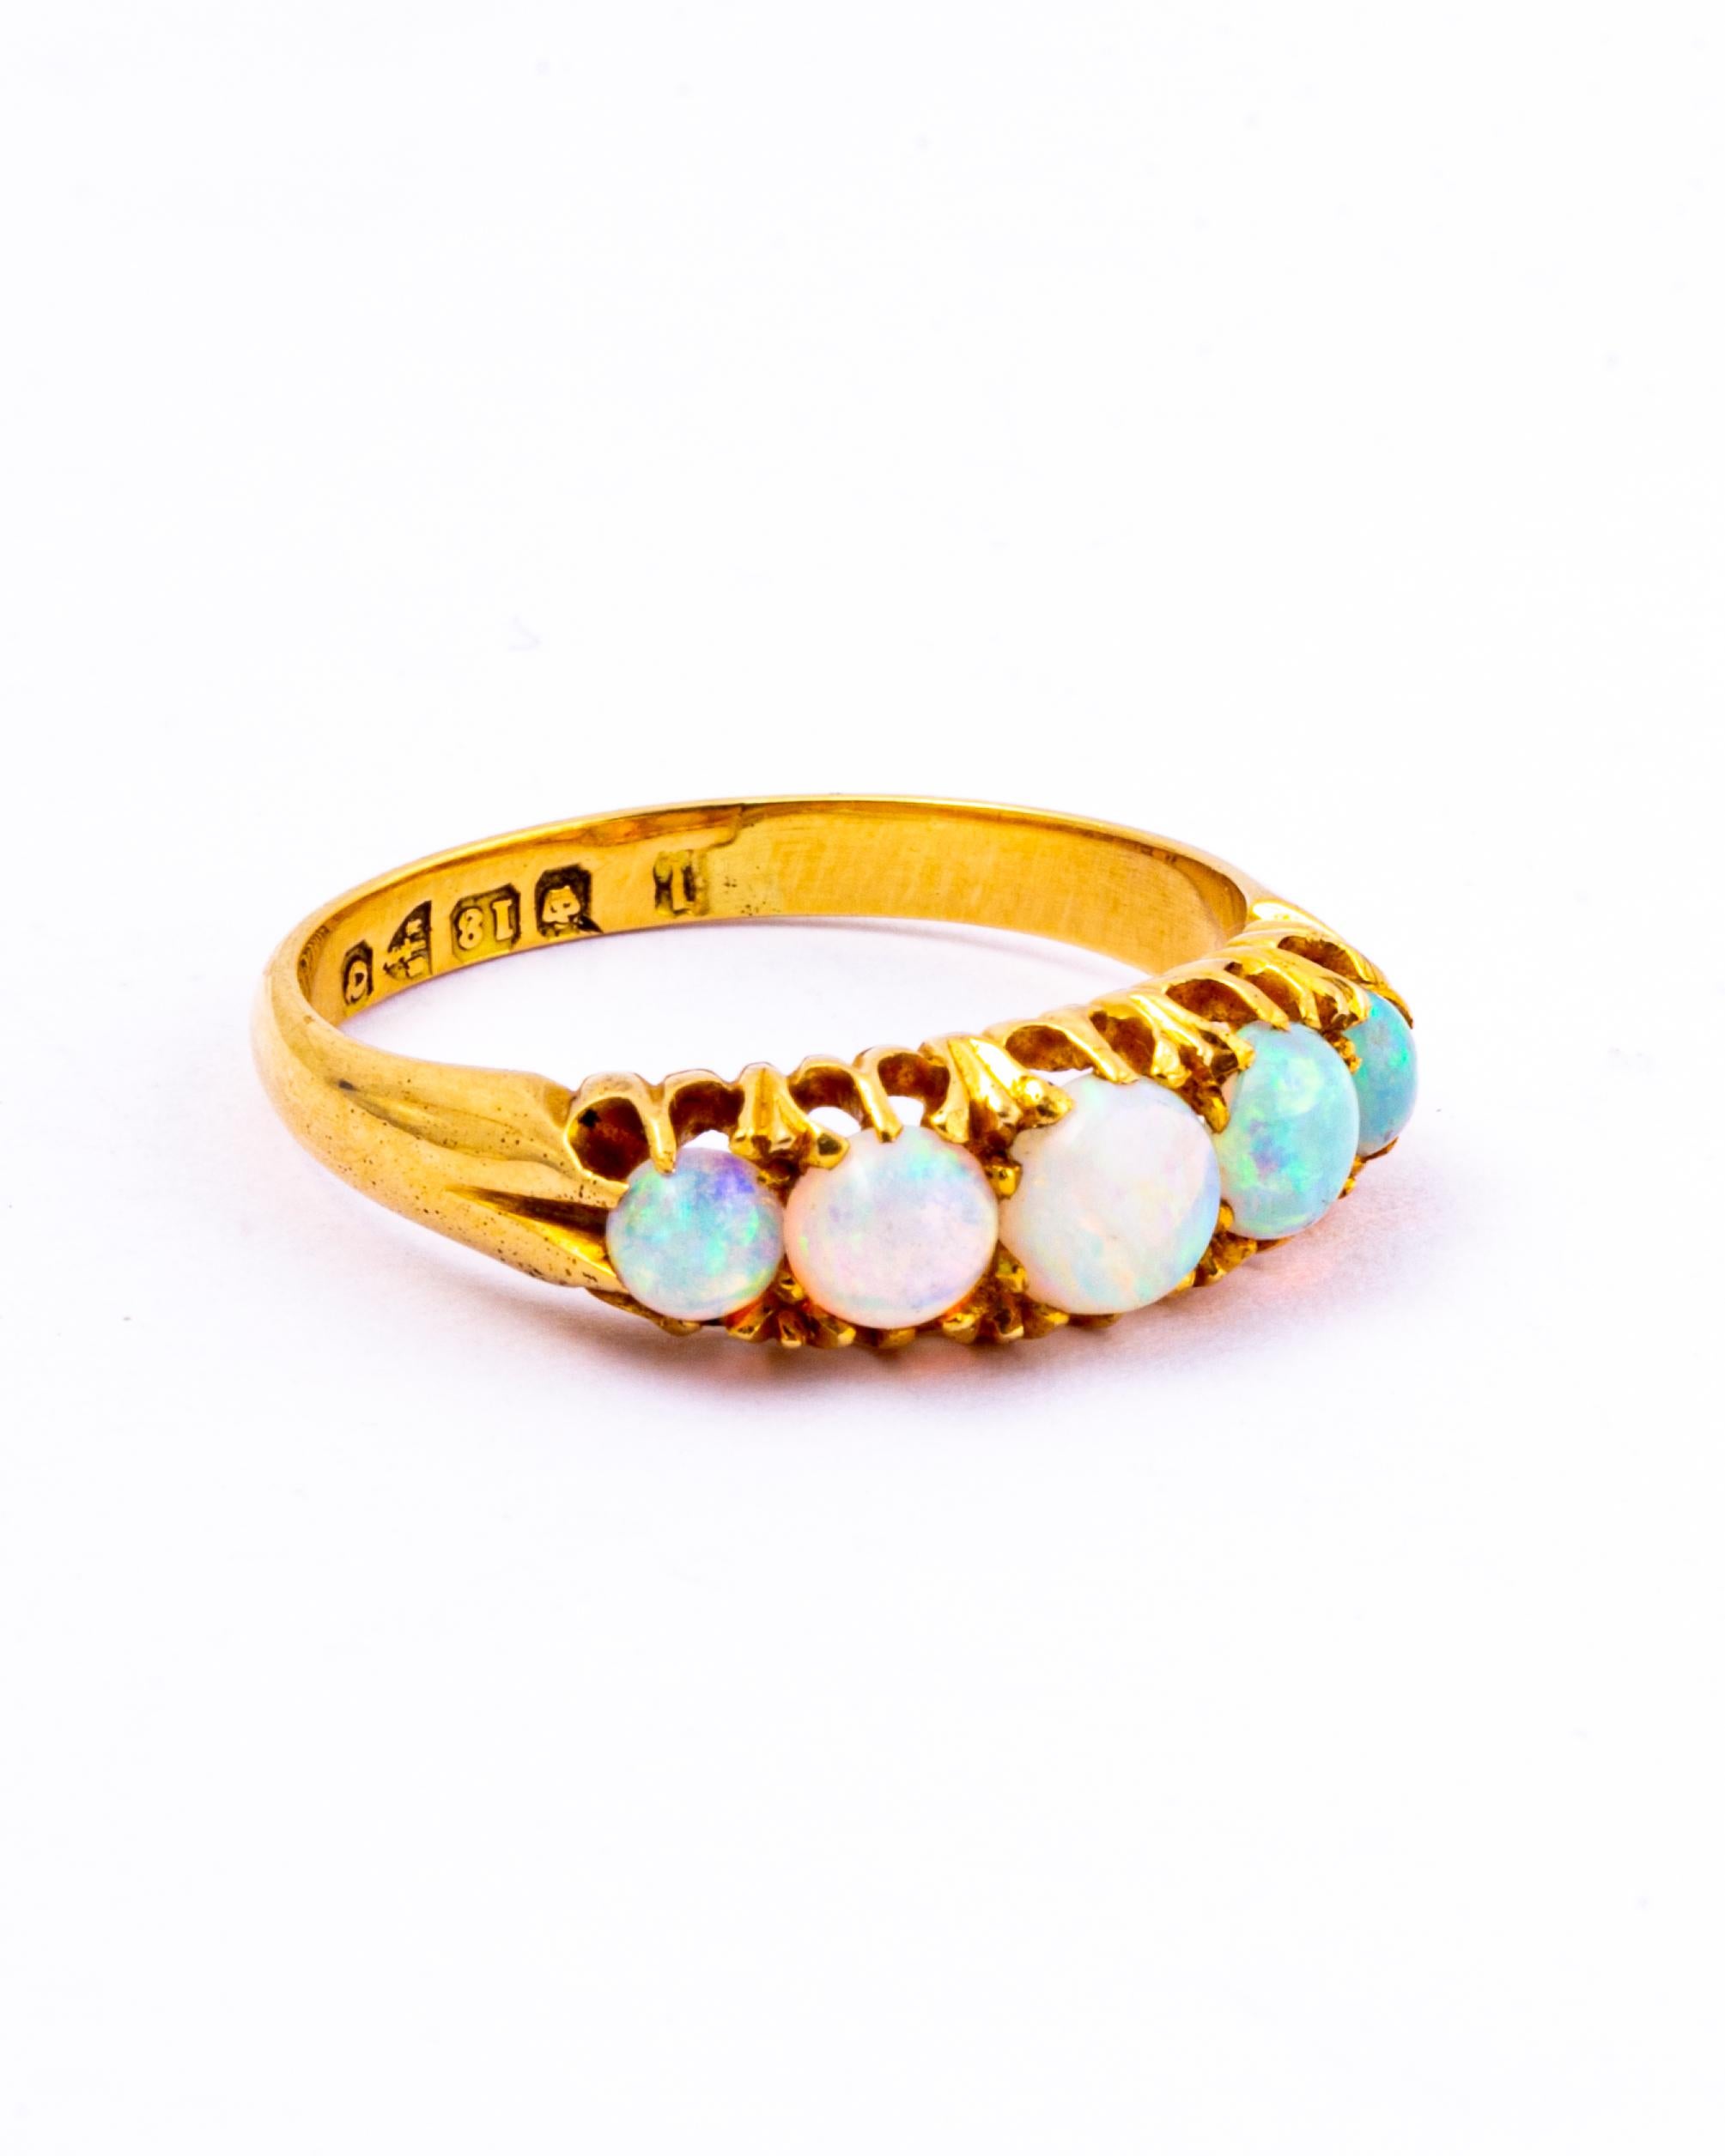 The five oval cabochon opals set in this ring are just beautiful! They have flecks of every colour and are mesmerising. The stones are set in 18ct gold claw settings and the ring has a chunky feel to it. 

Ring Size: Q or 8 1/4
Band Width: 5mm